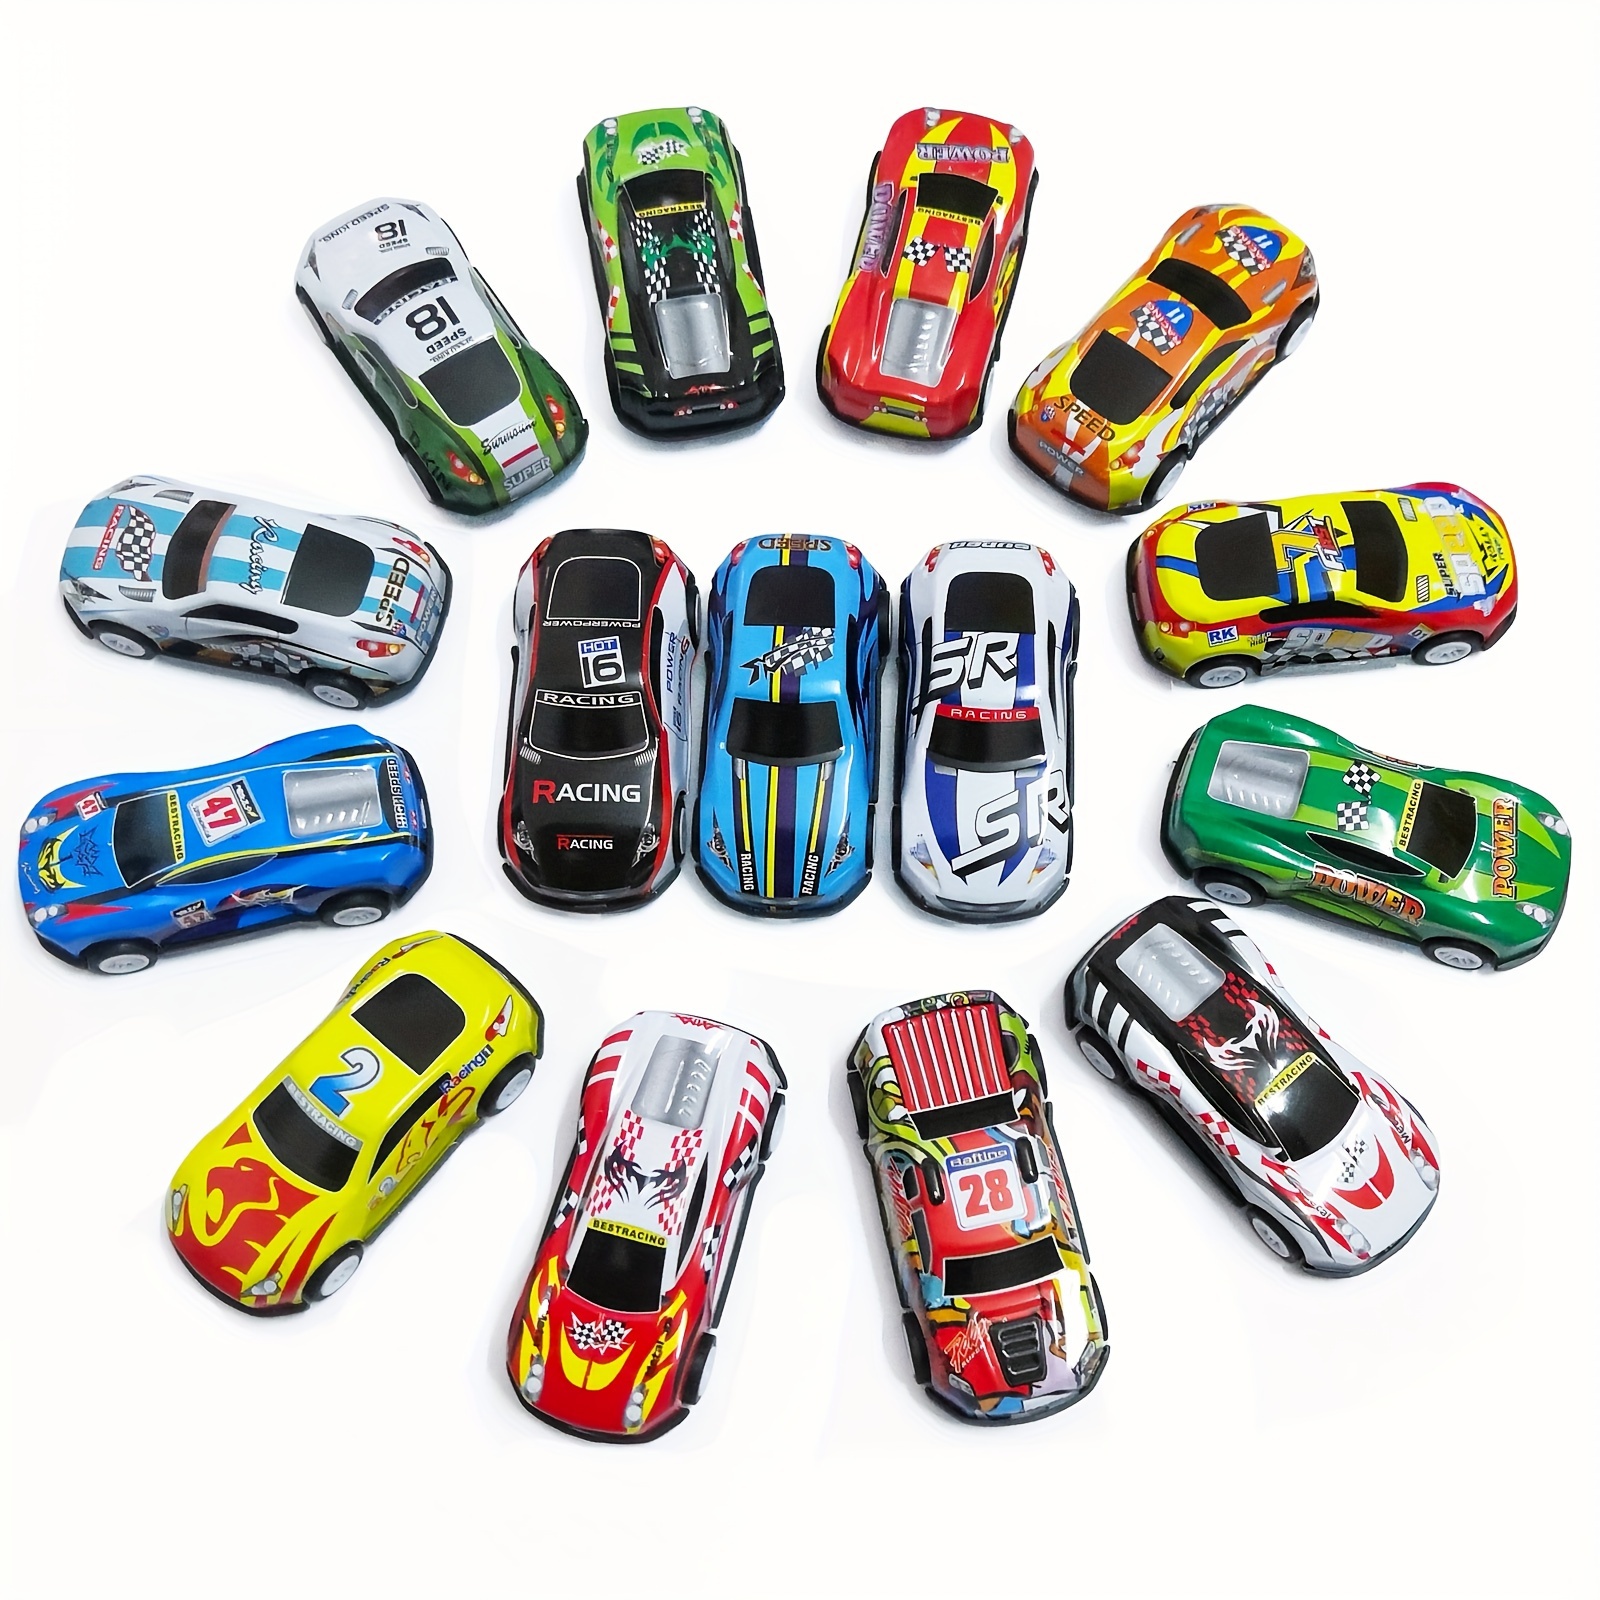 

10-20pcs Pull Back Cars For Kids, Mini Vehicles Toy Bulk Party Favor Race Cars Toys, Goodie Bag Stuffers, Christmas Fillers For Boys Girls Toddlers